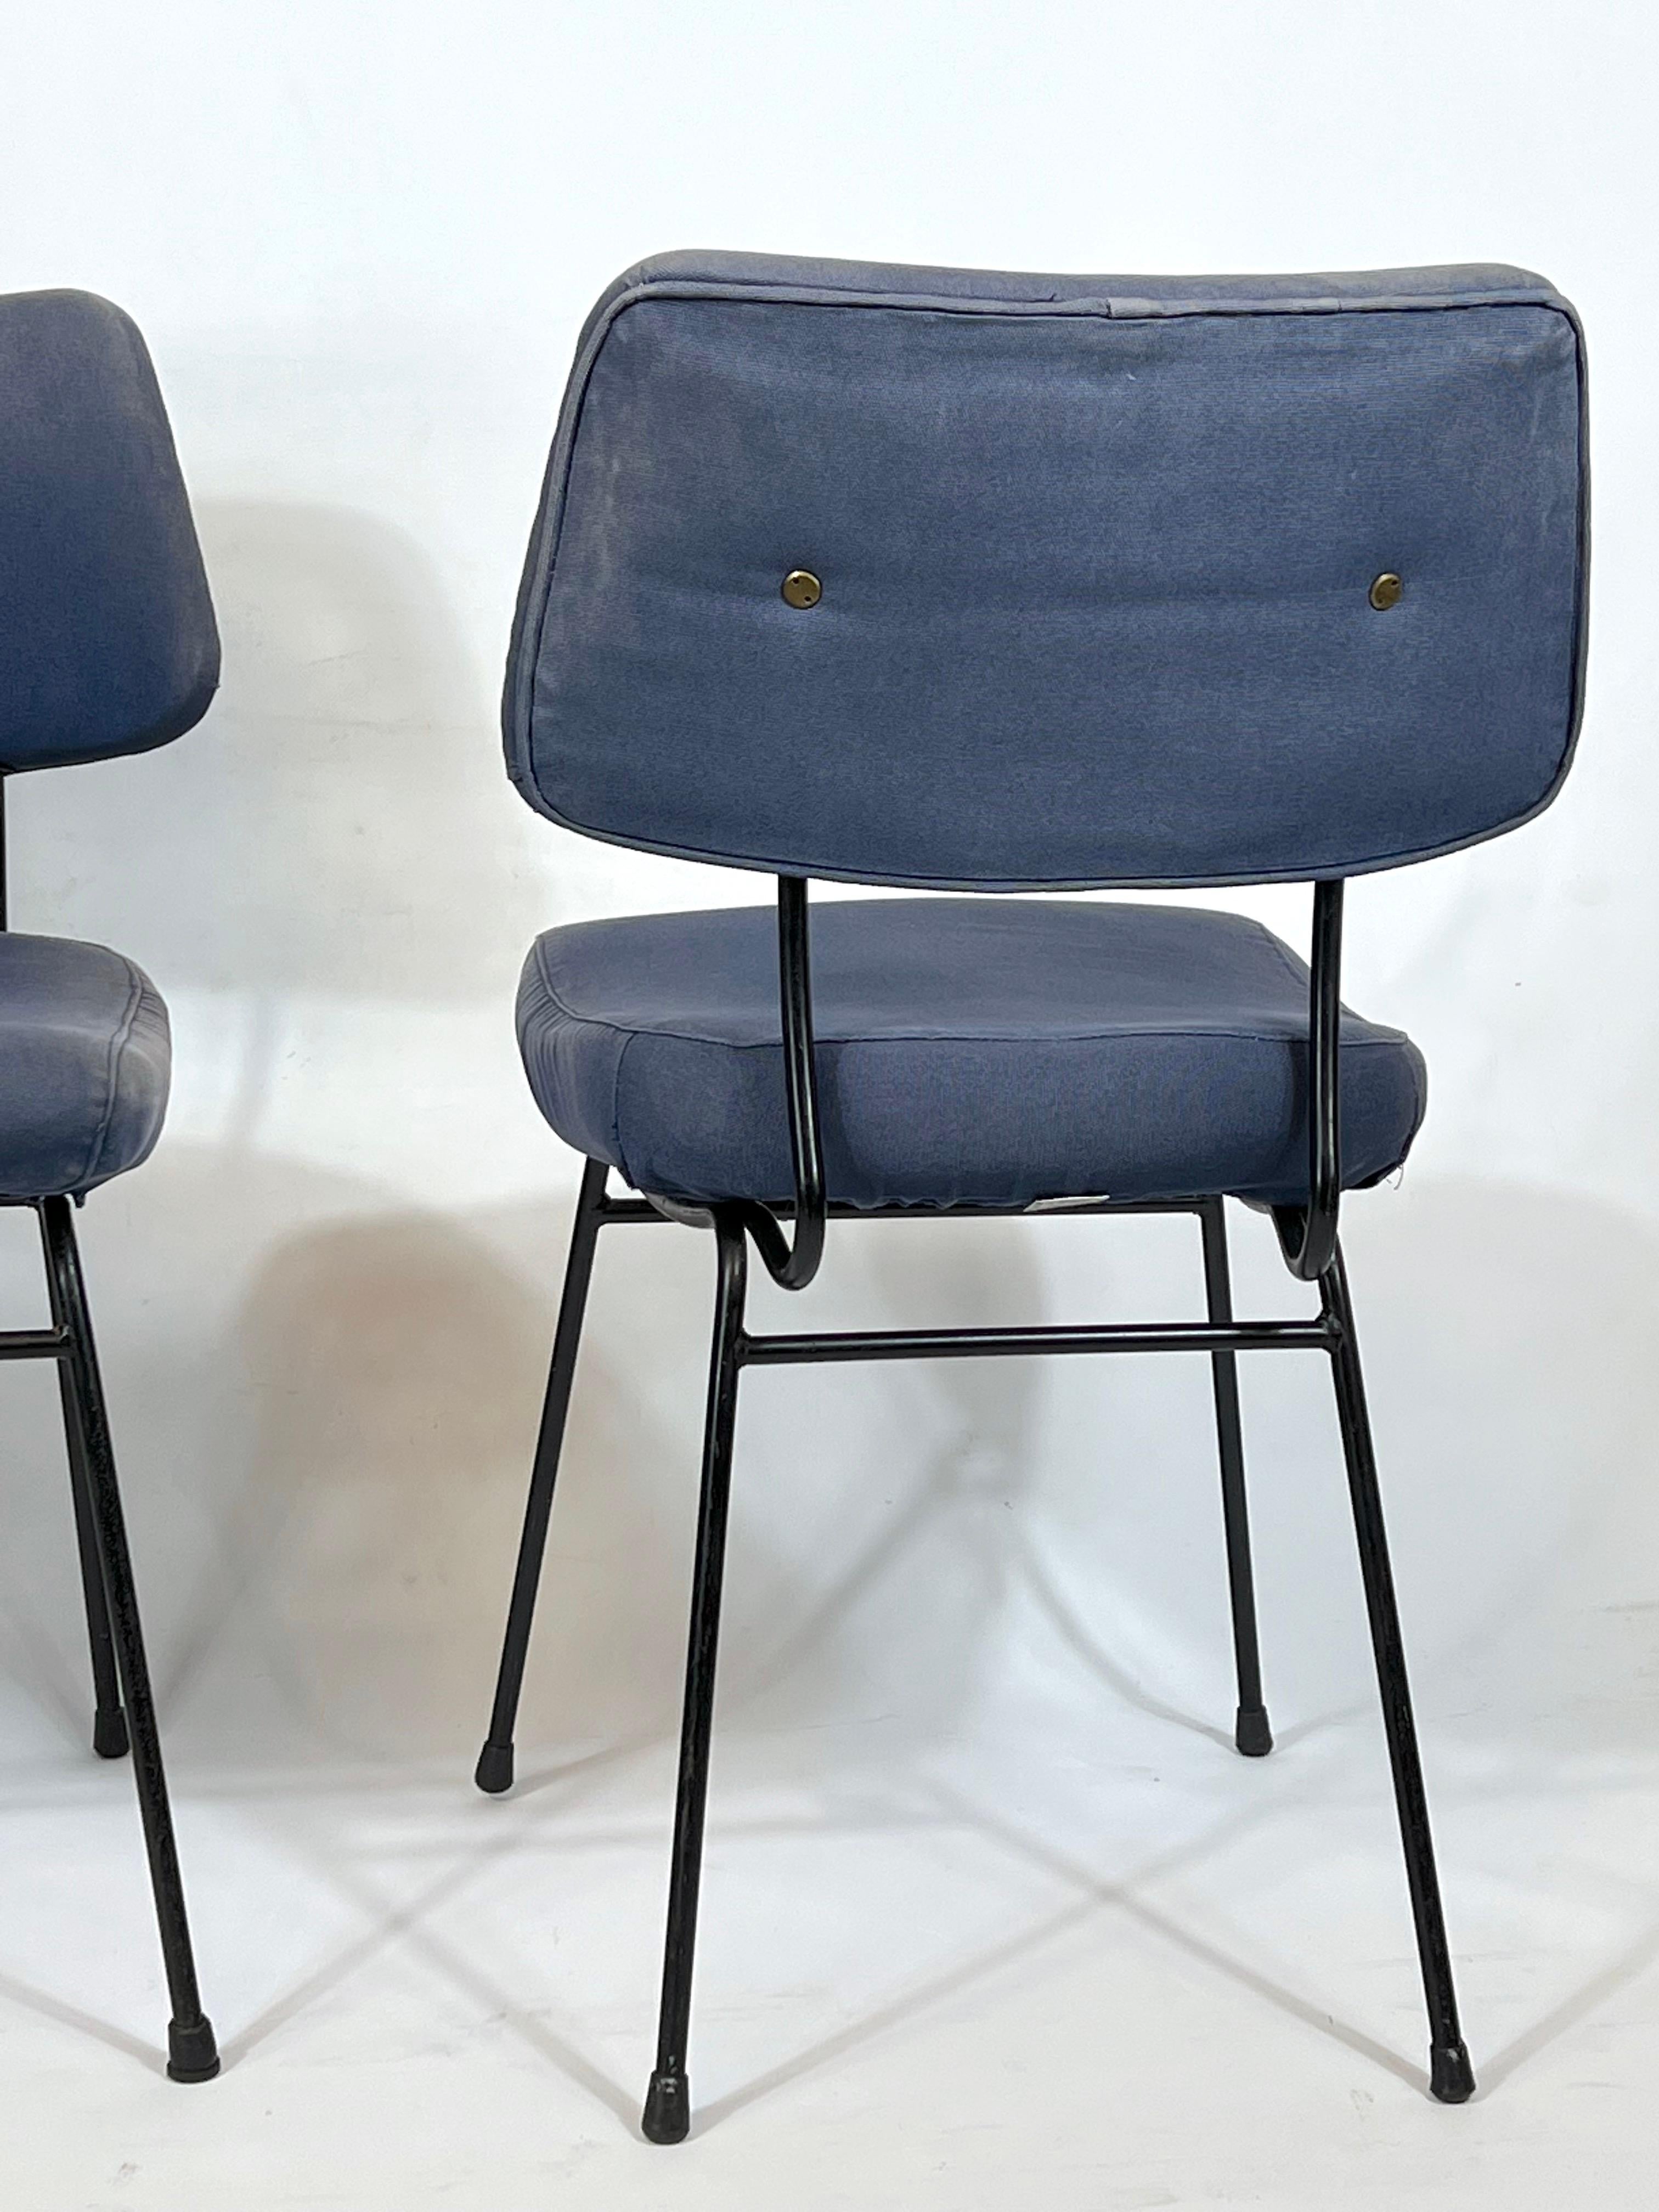 Erberto Carboni for Arflex, Set of Six Delfino Dining Chairs, 1950s For Sale 2